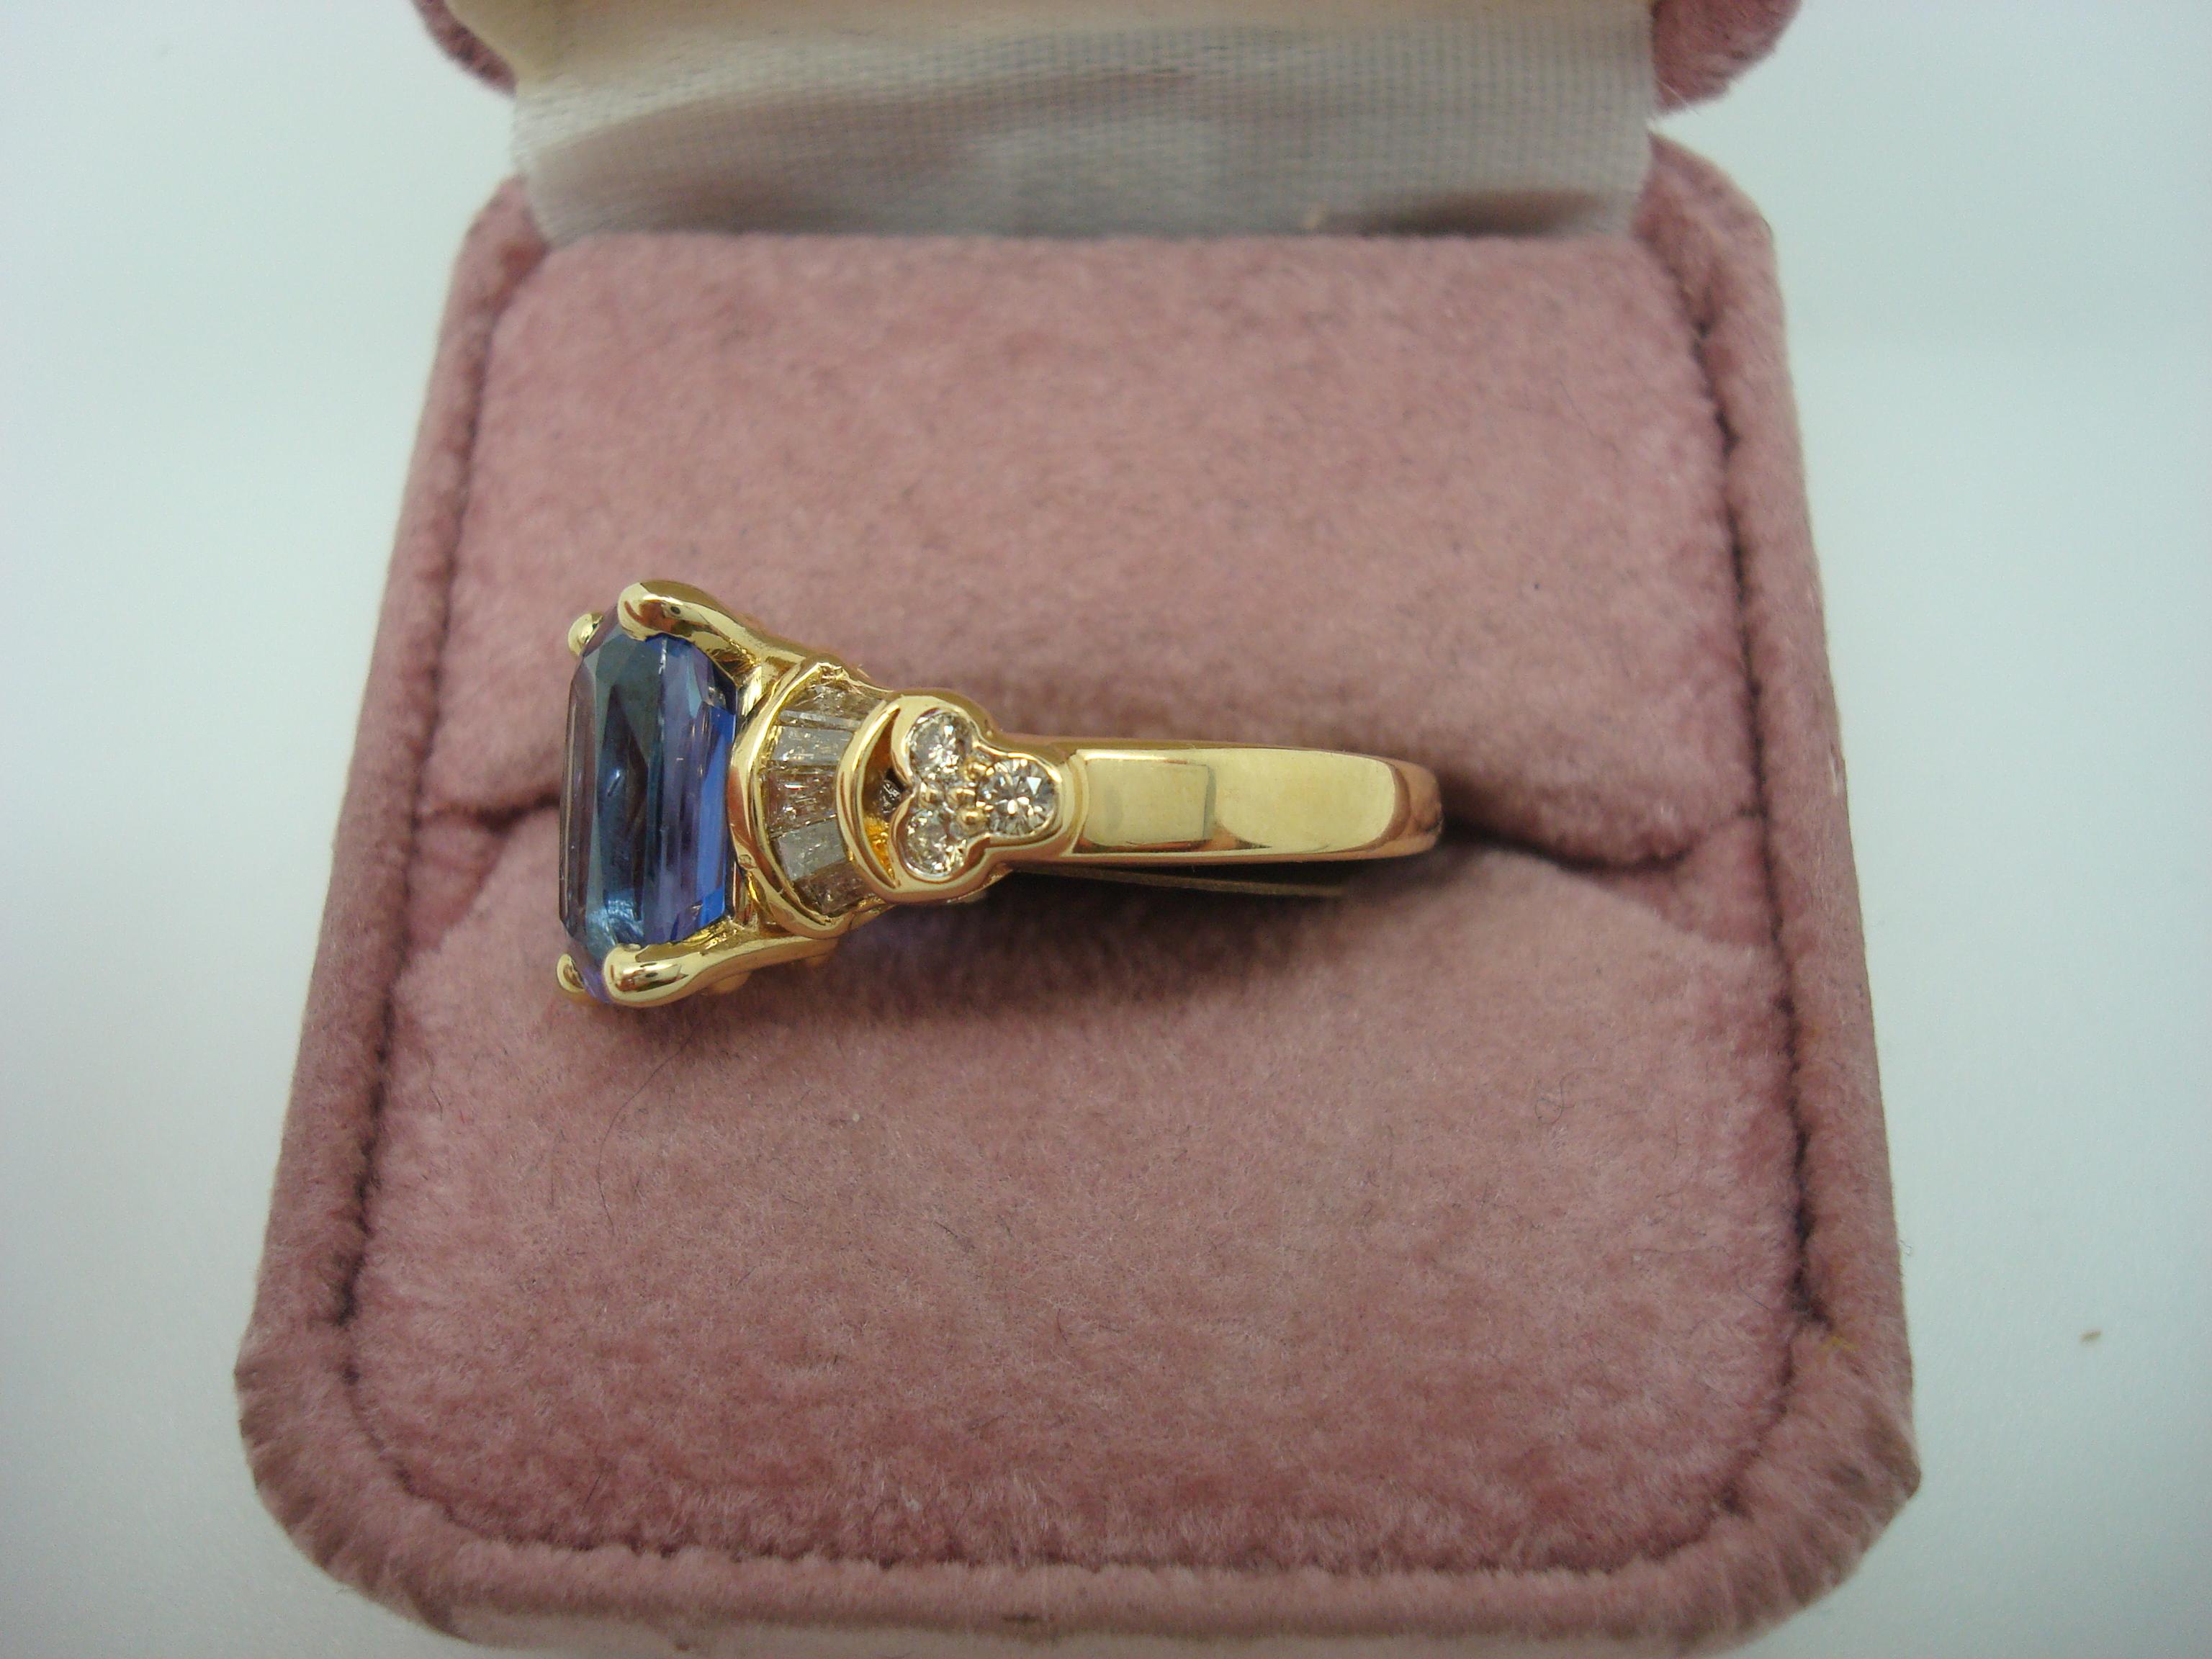 18k Yellow Gold 2.59ct Genuine Natural Tanzanite and Diamond Ring (#J1811)

Very fine 18k yellow gold ring featuring an excellent 2.59 carat tanzanite. The tanzanite is a medium-dark color in a modified oval brilliant cut, and it measures